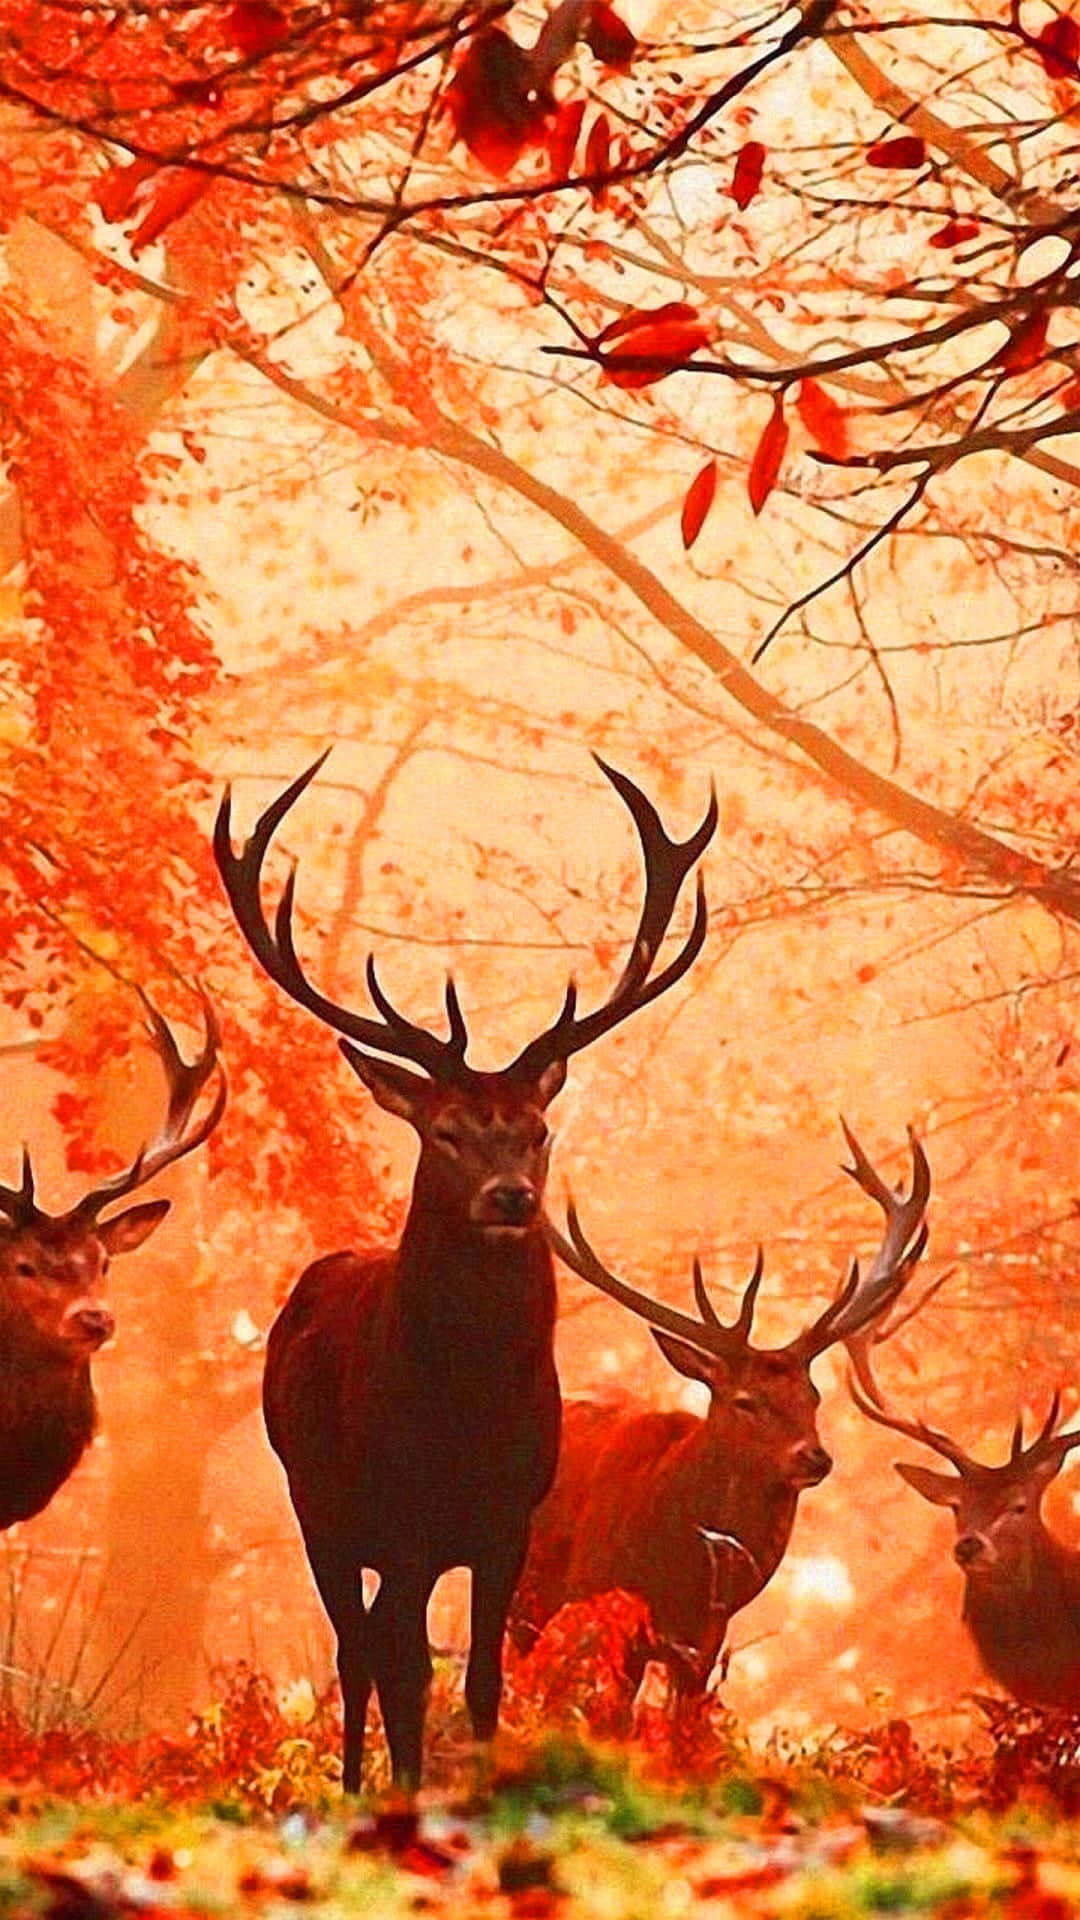 Get the Most Out of Your Hunt with the Perfect Hunting Phone Wallpaper